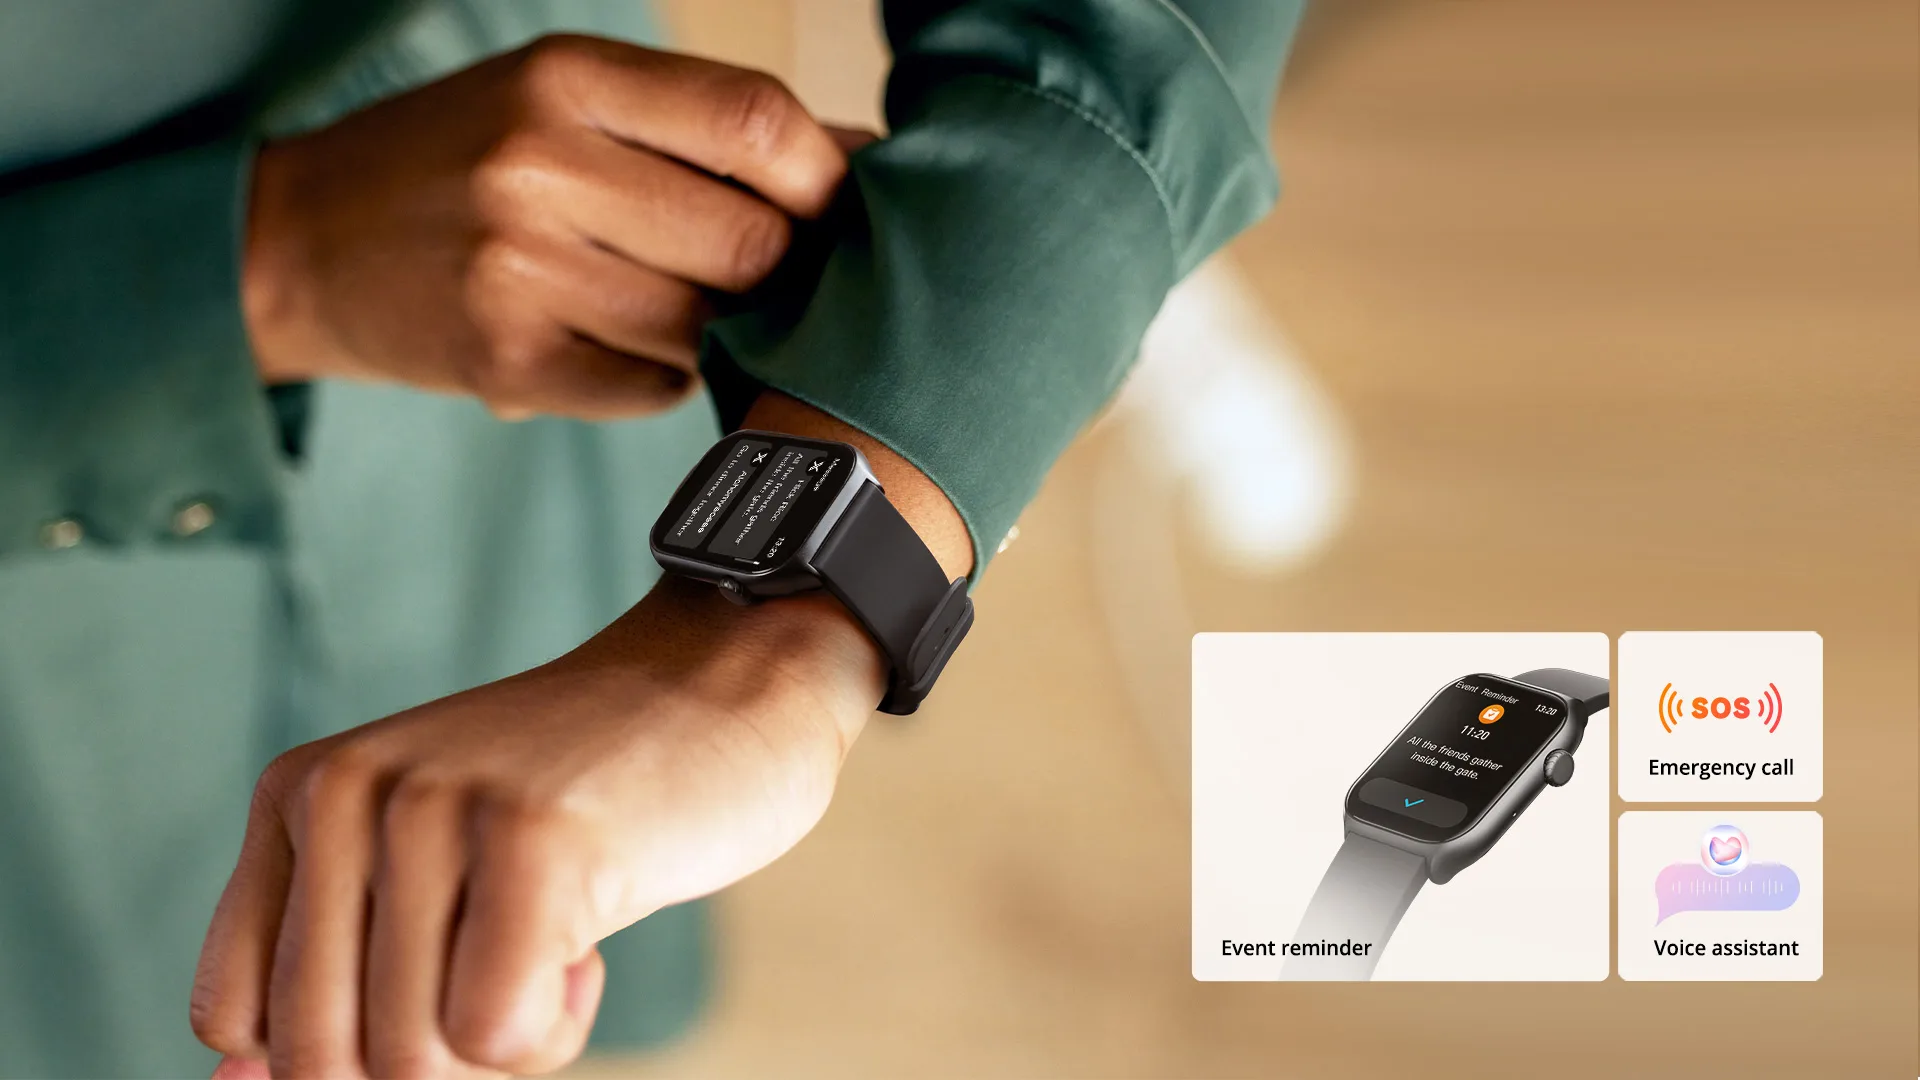 GTS7 Smart Watch - Smart Assistant on the Wrist